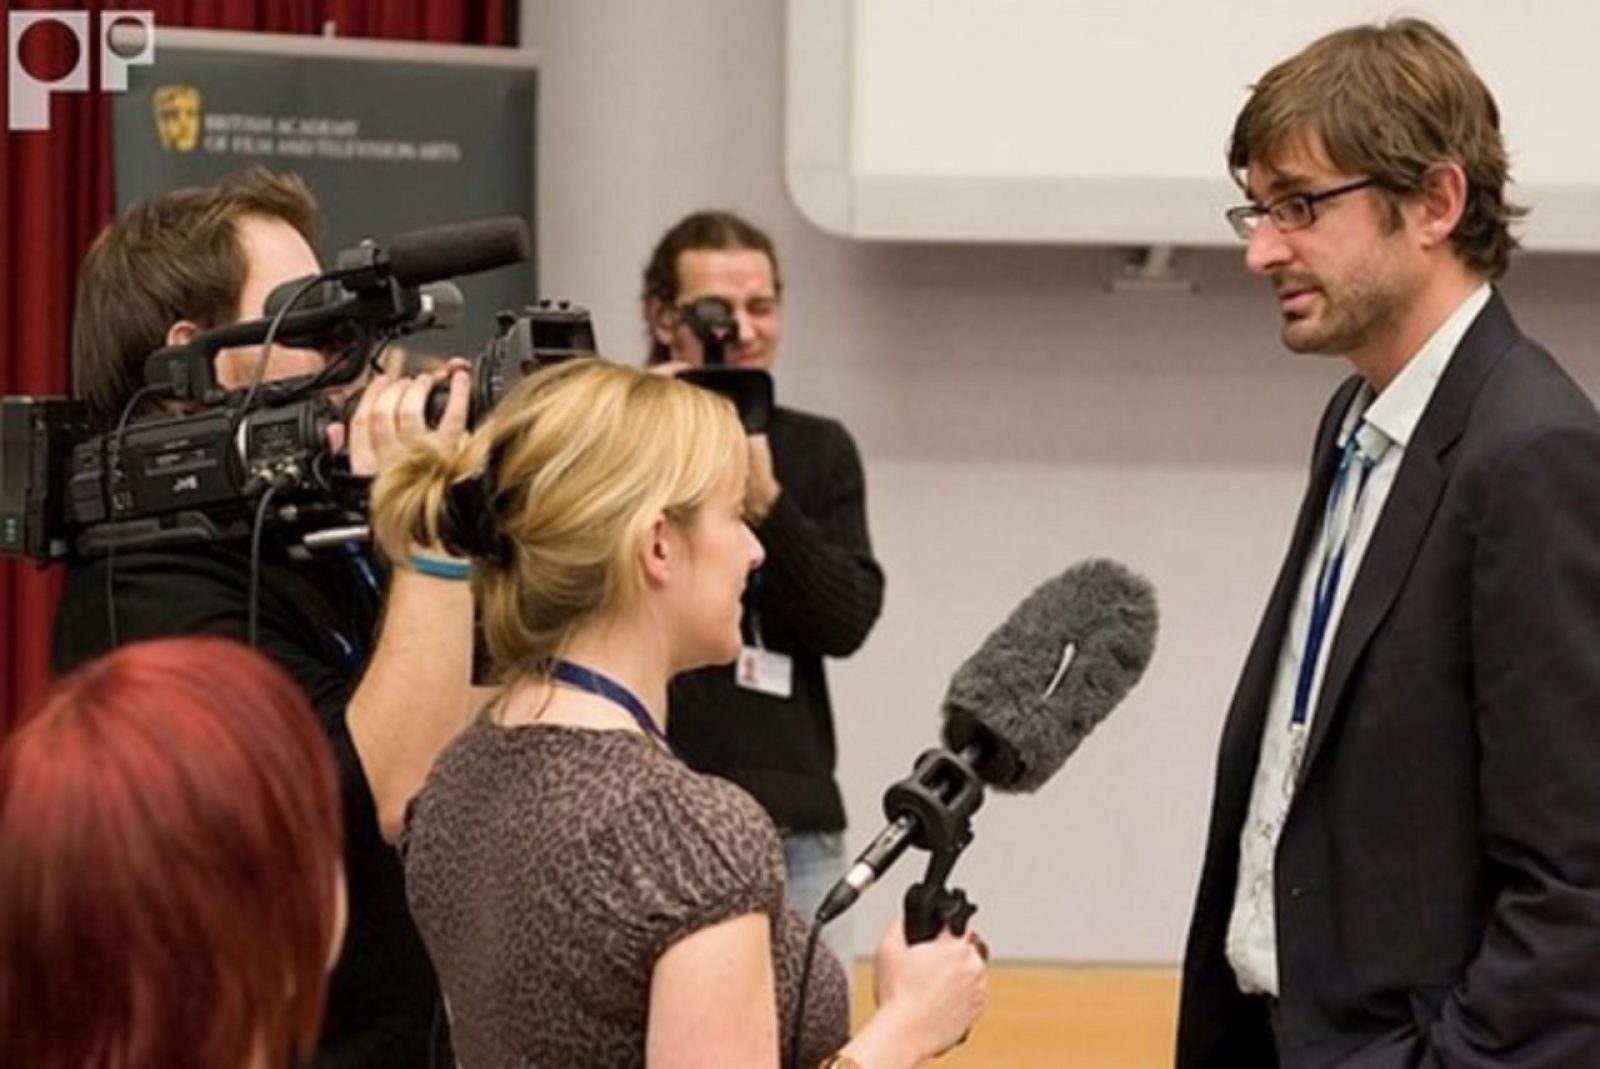 Helen Dugdale interviewing Louis Theroux